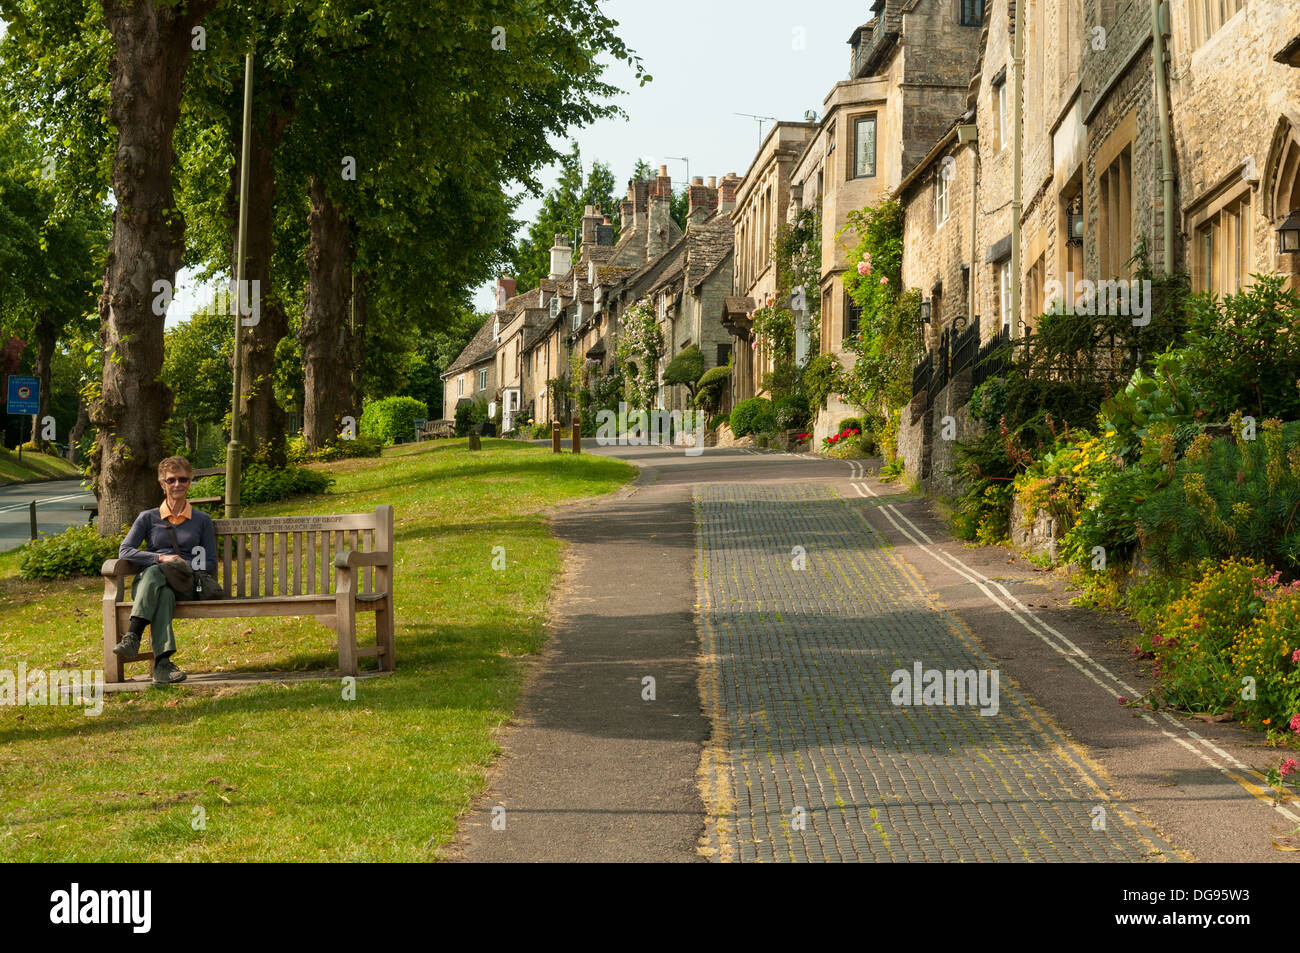 Cottages on High Street, Burford, Oxfordshire, England Stock Photo